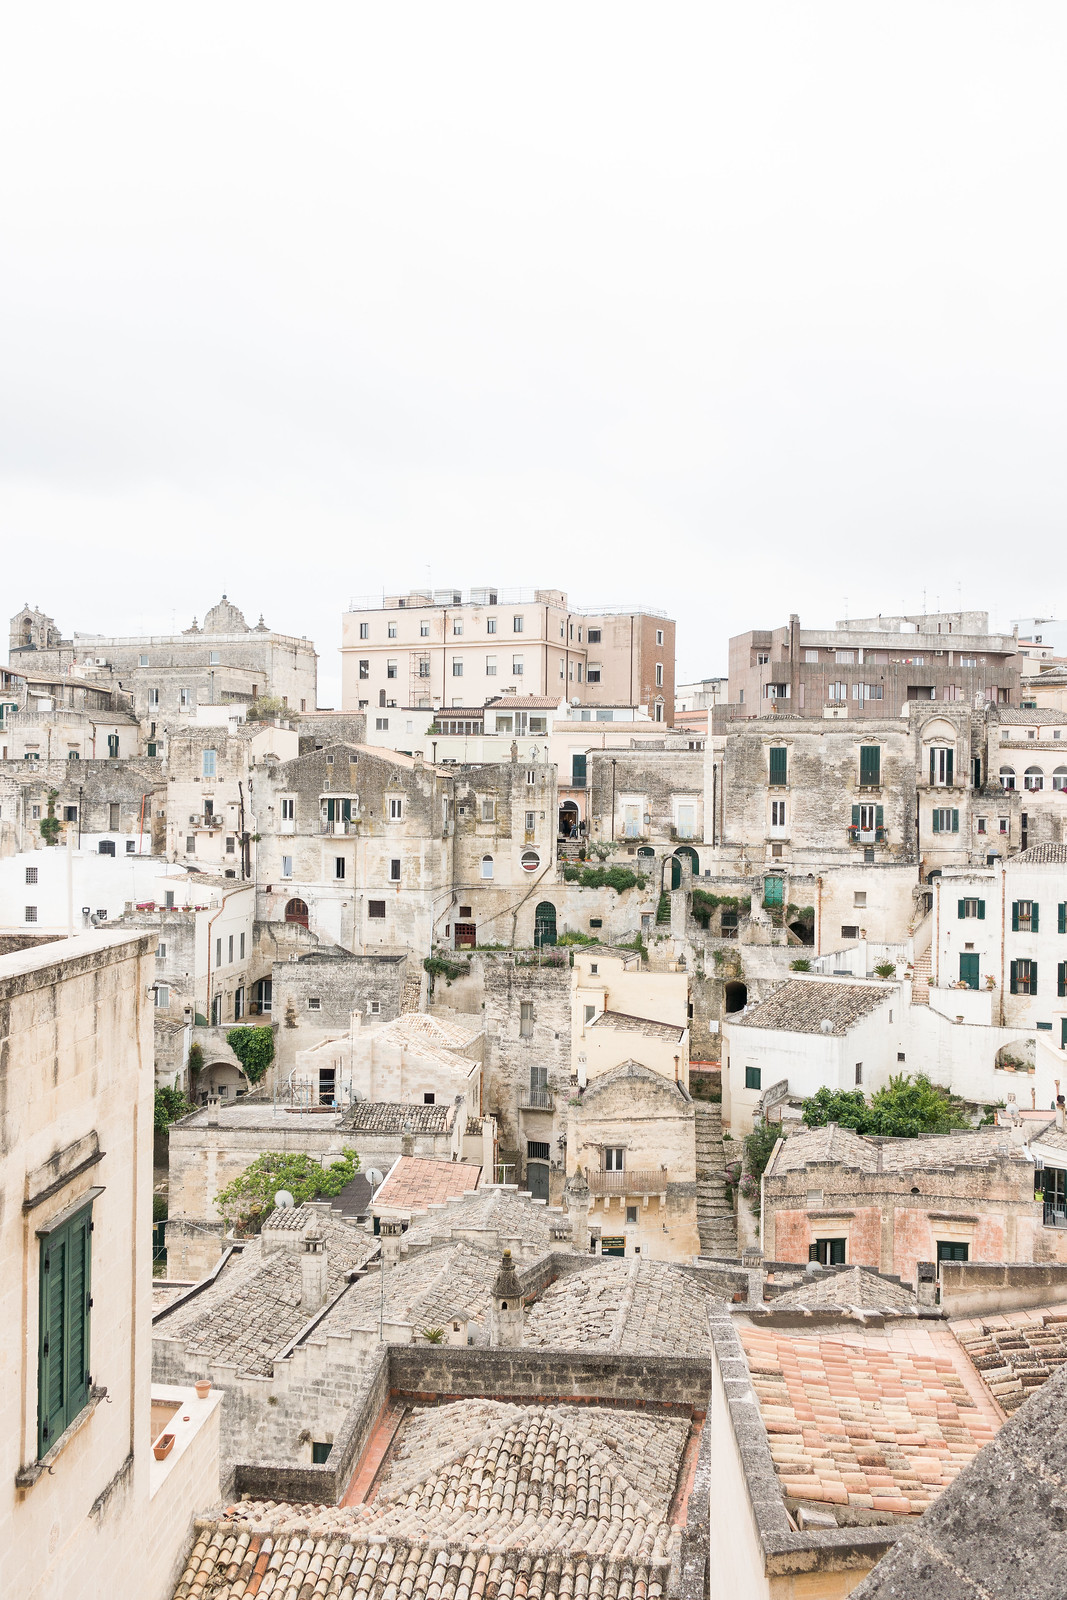 Visiting Matera, Italy: Where To Stay, Things To Do, and What To Eat